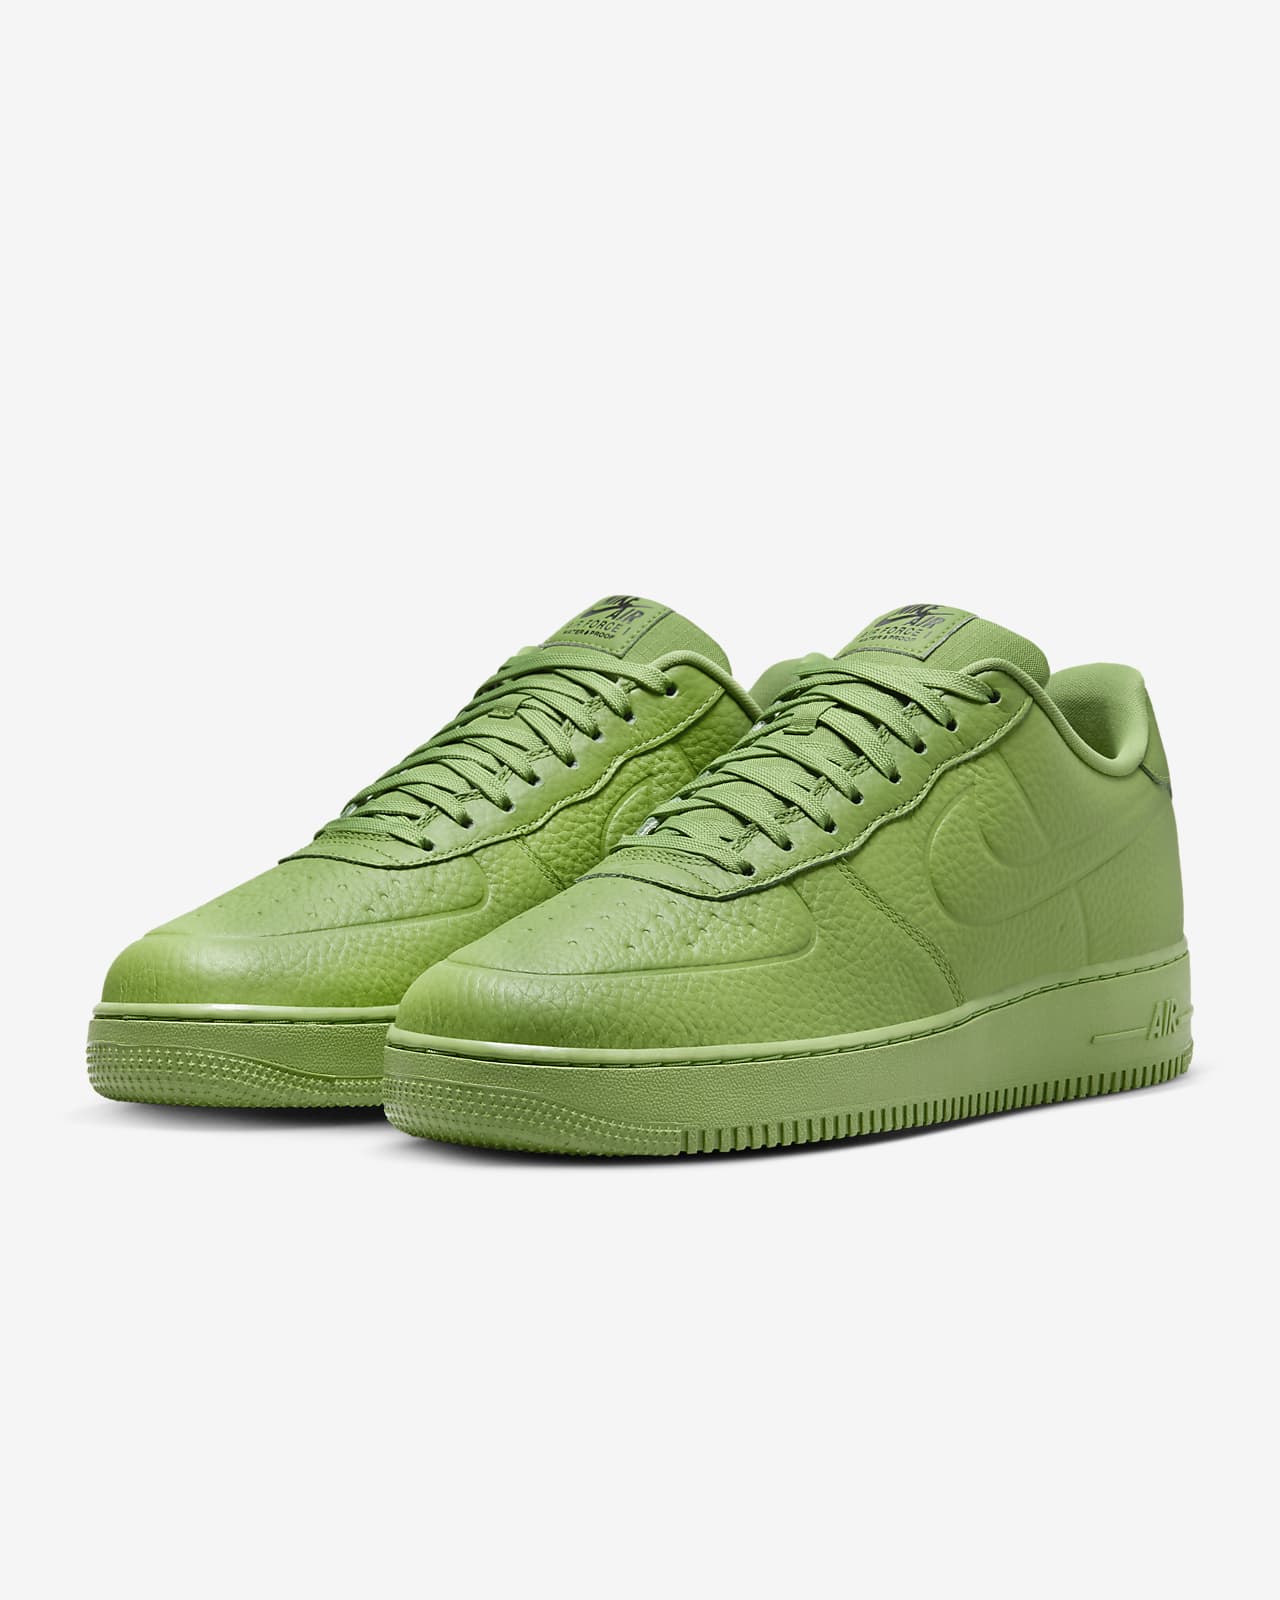 Original Air Force 1 Super Chunky Lace Sneakers Available in